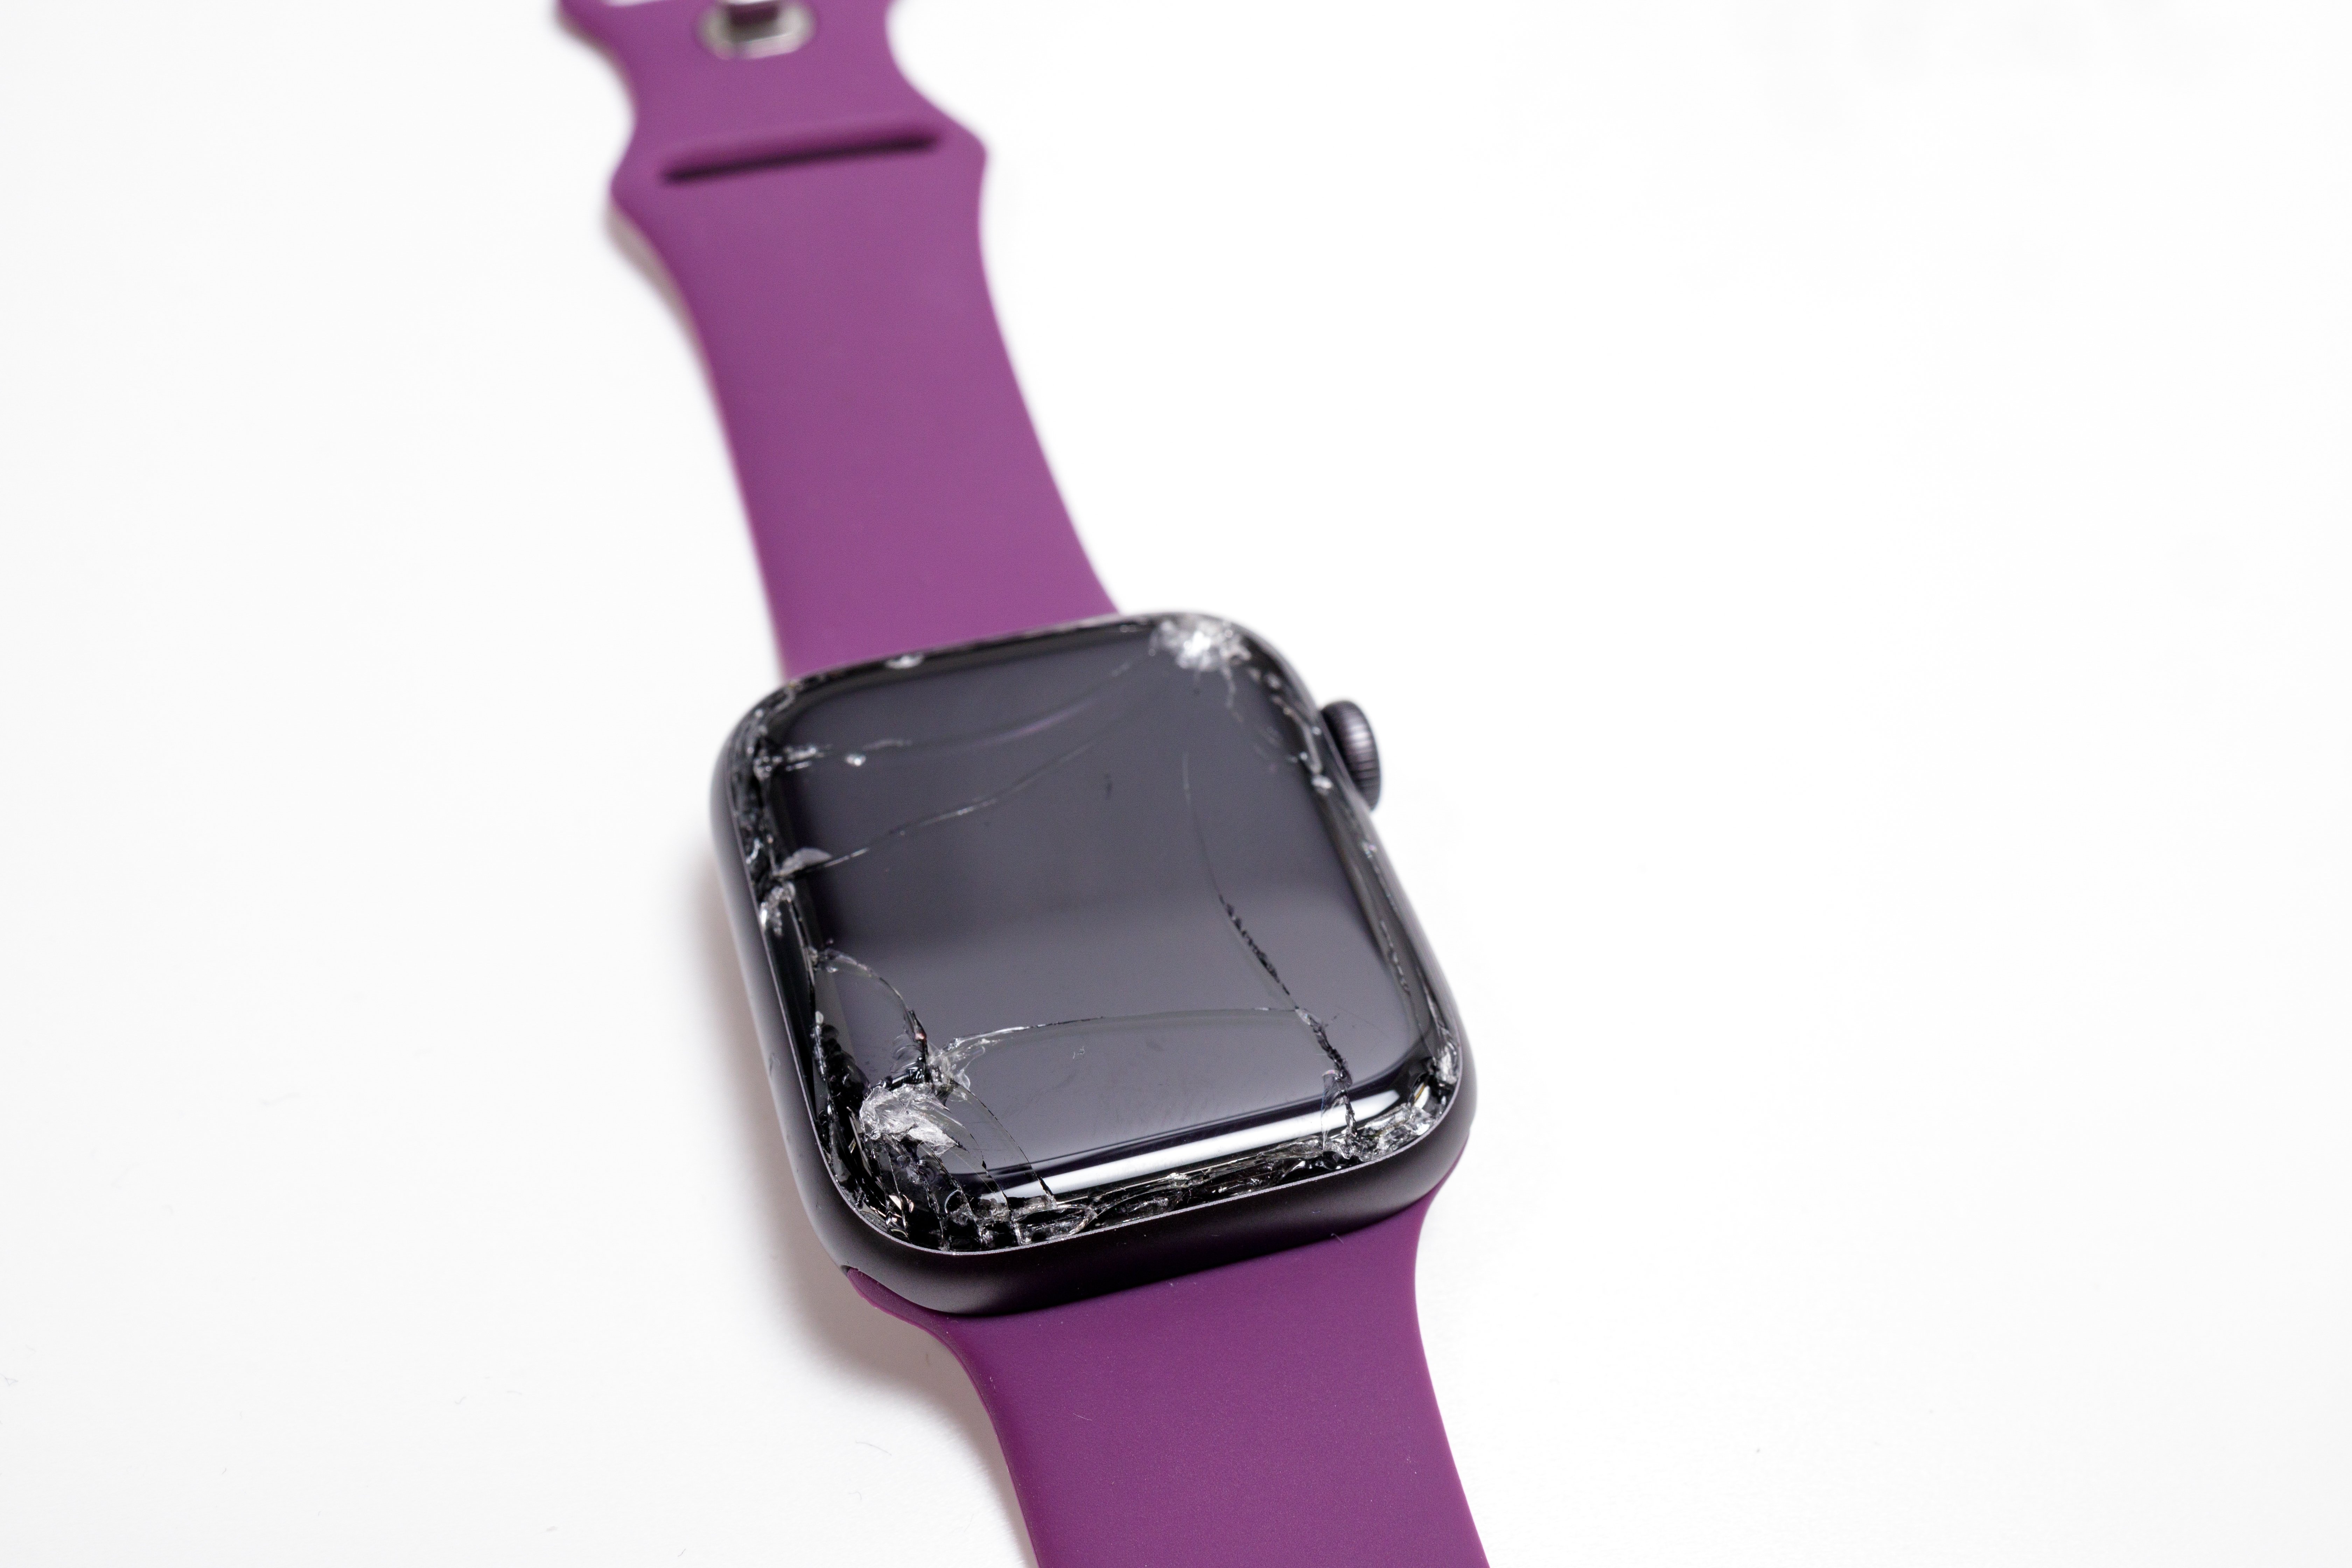 Apple Watch with a cracked screen